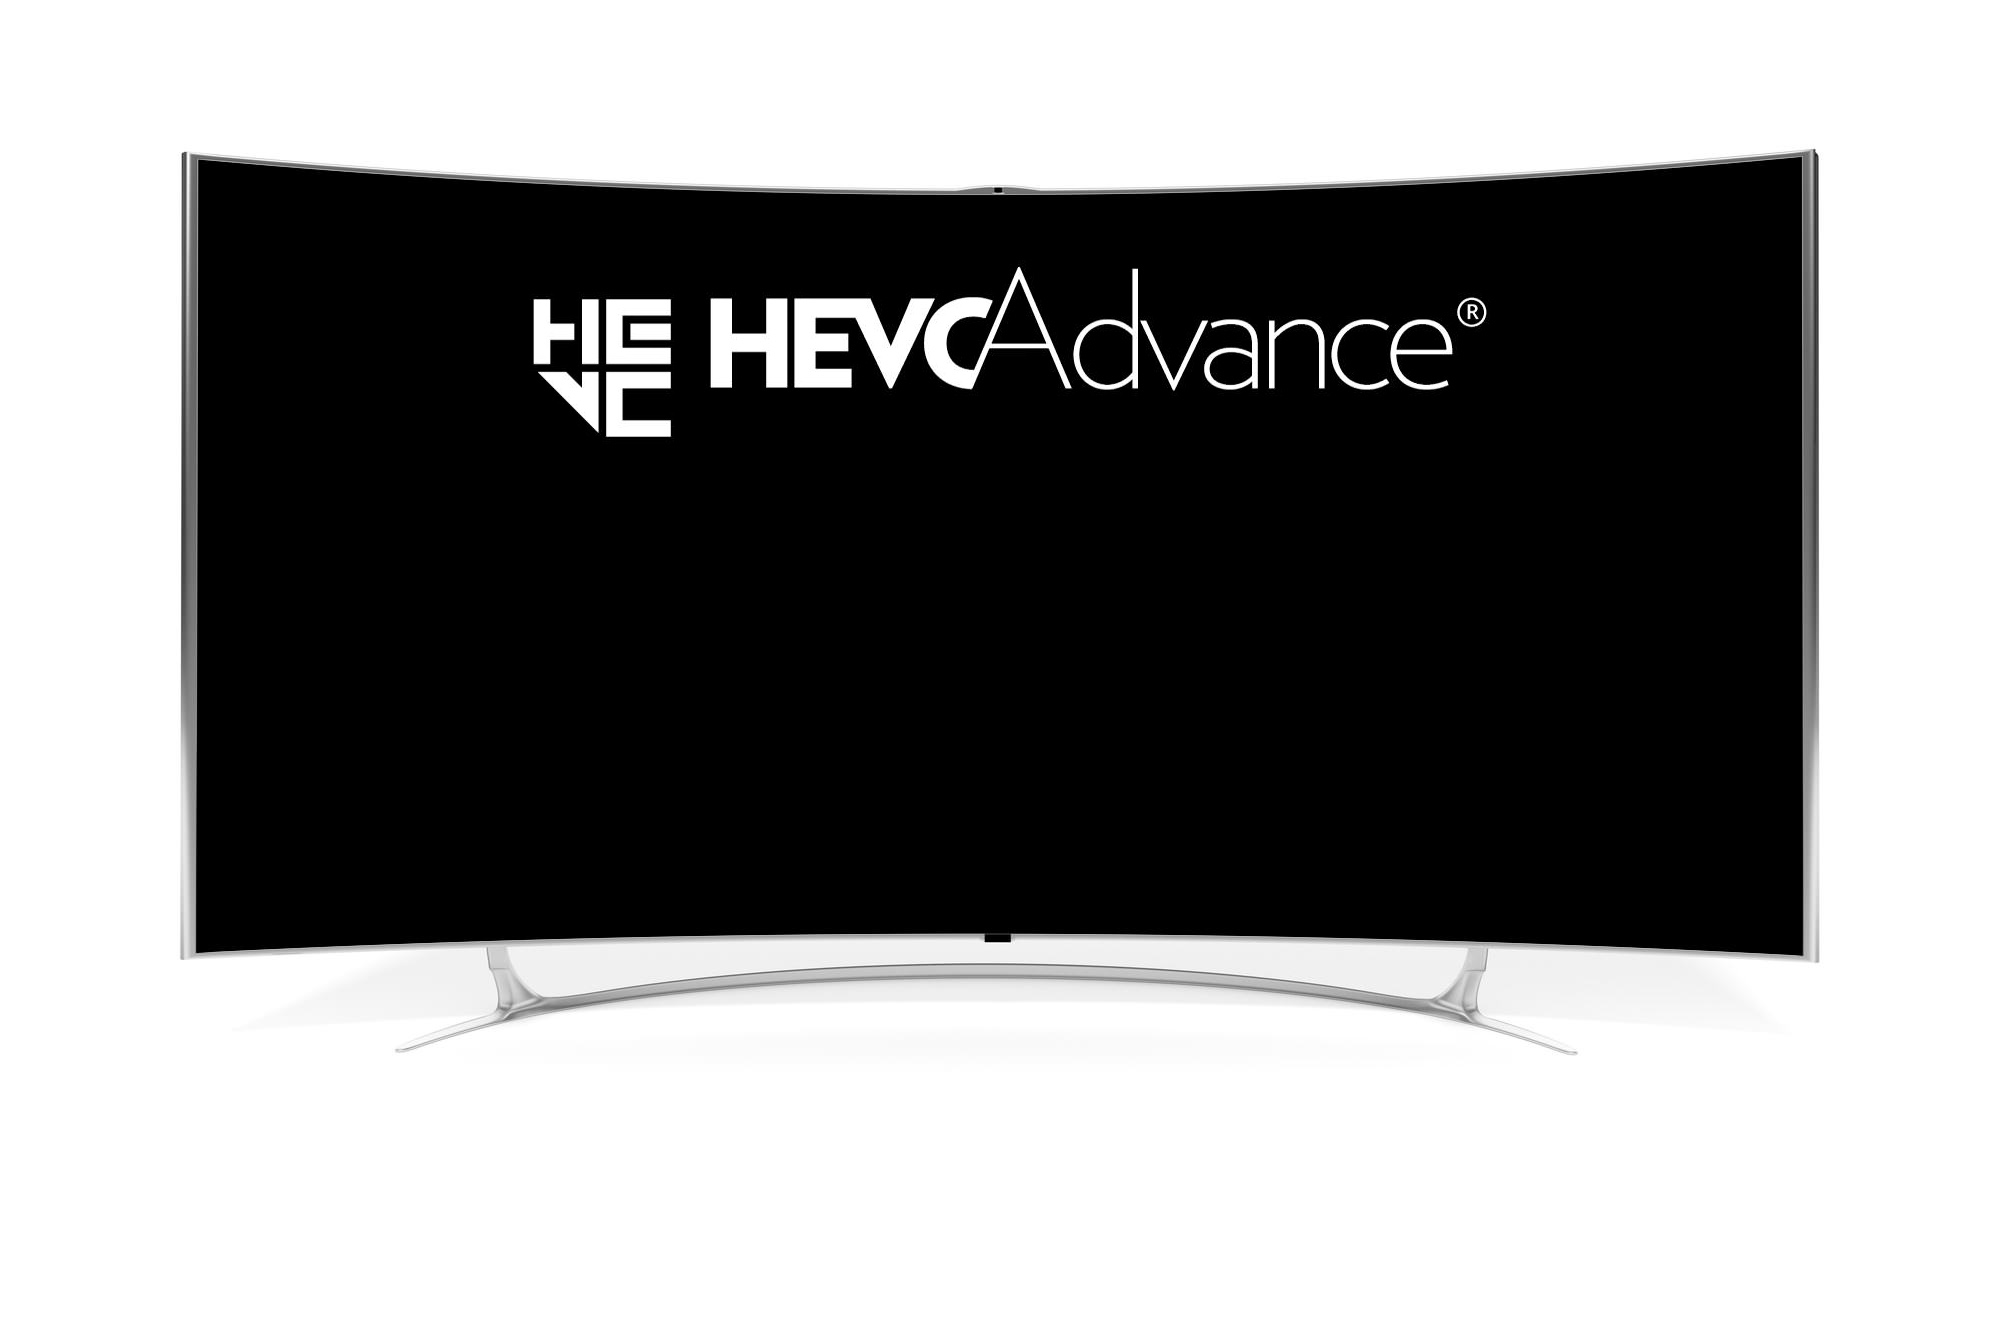 Patent Pool HEVC Advance Announces New Software Policy